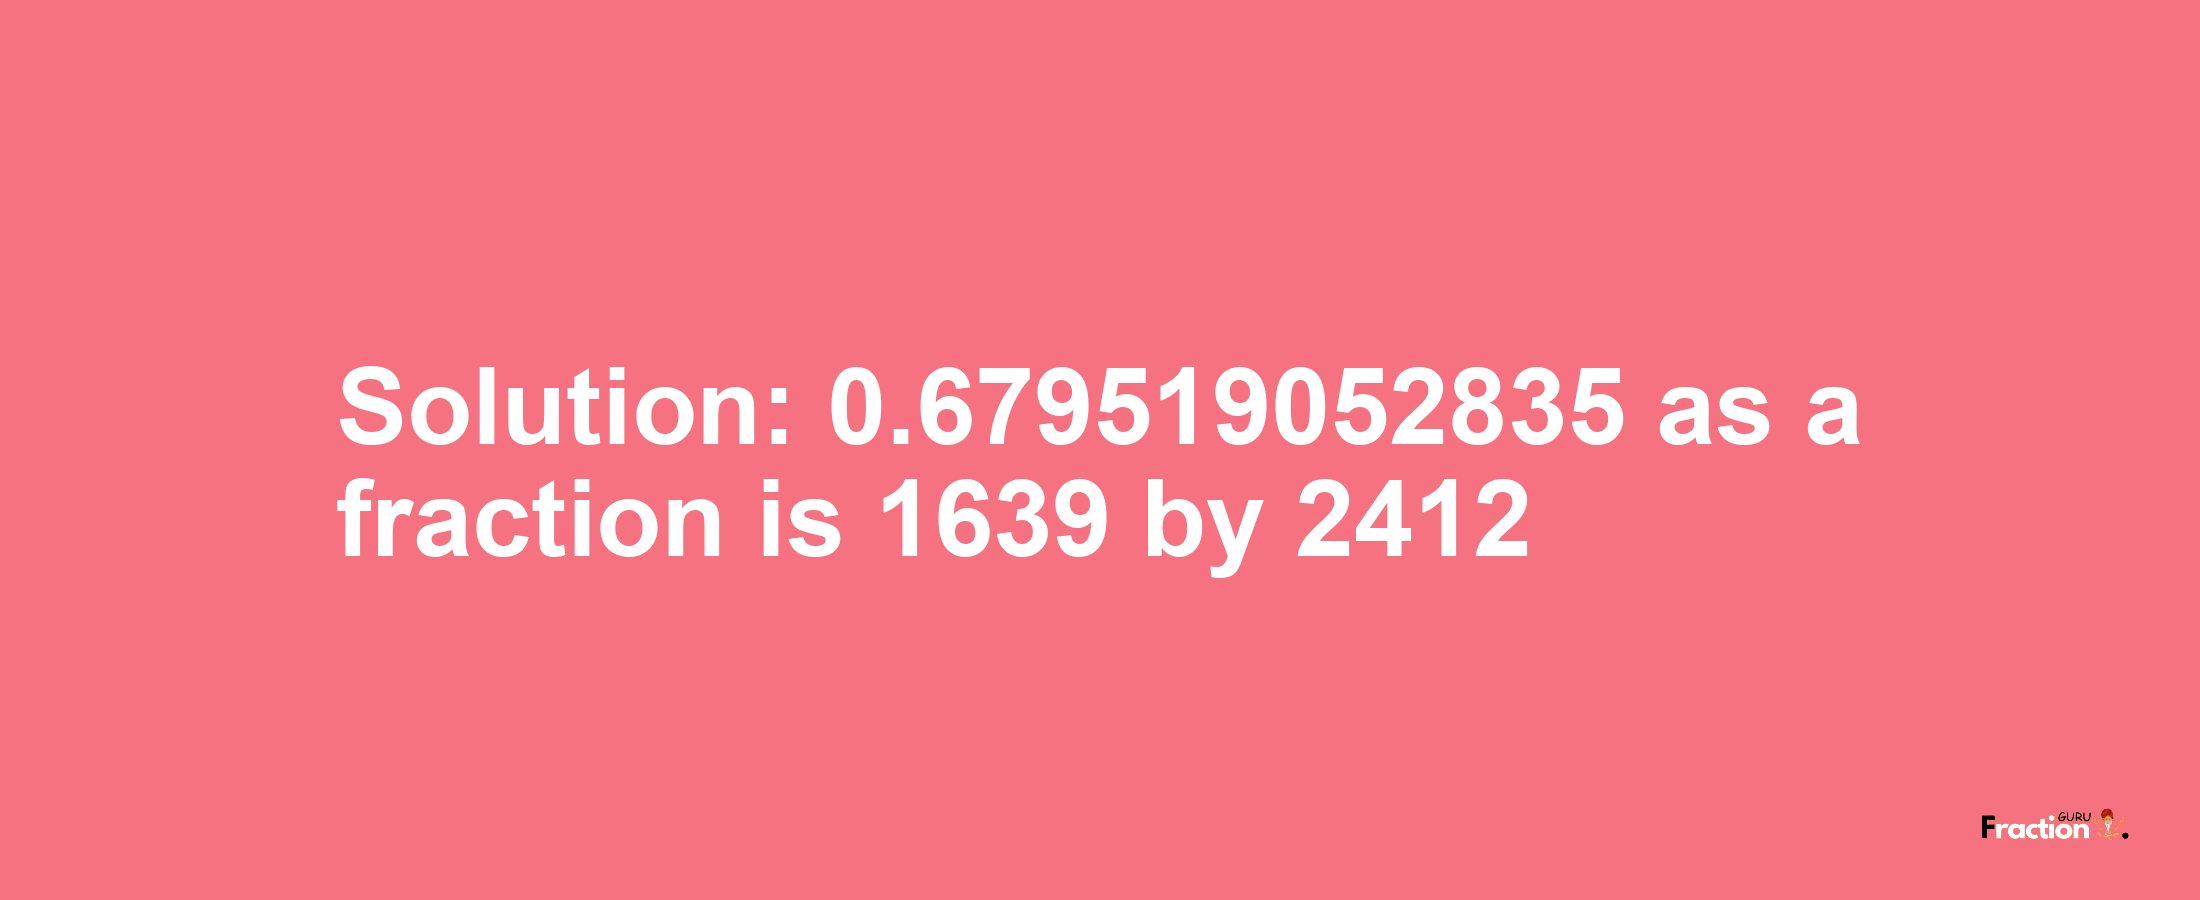 Solution:0.679519052835 as a fraction is 1639/2412